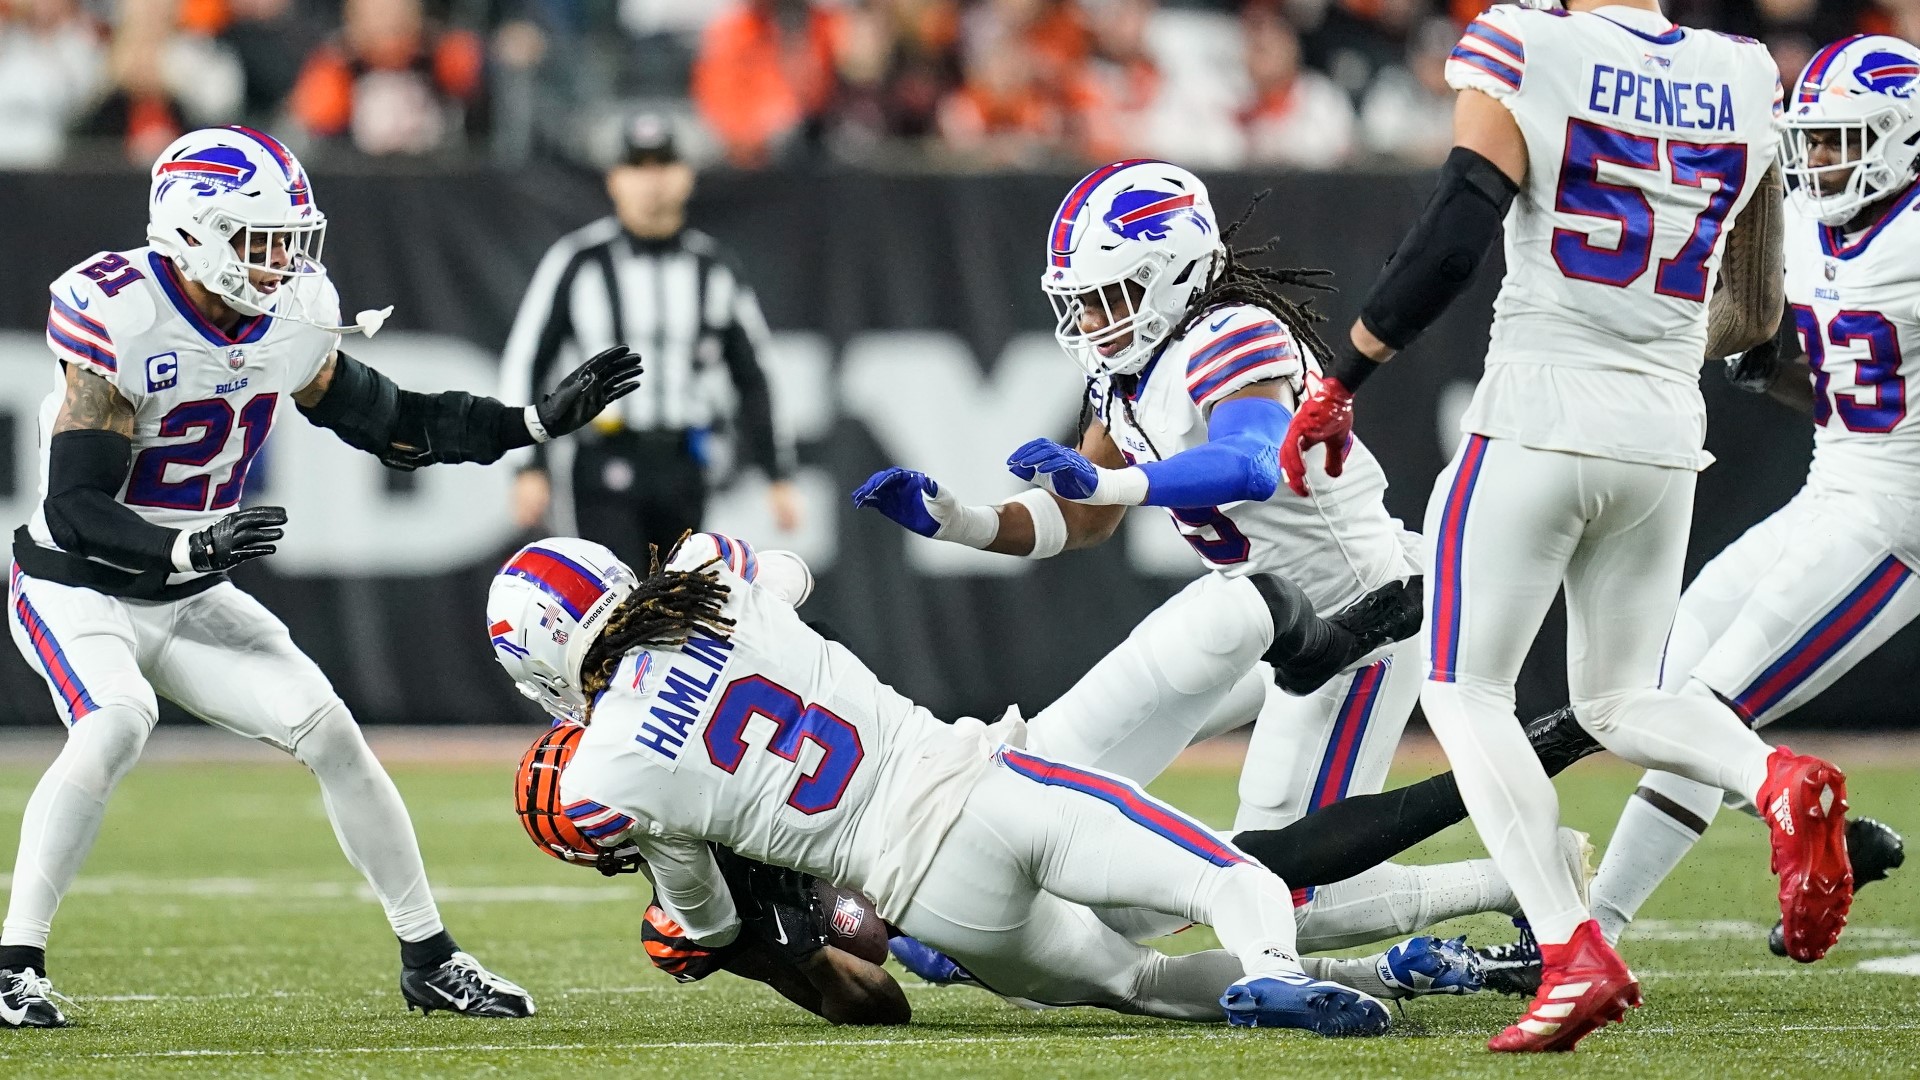 Bills safety Damar Hamlin was taken off the field with an apparent serious injury after making a tackle on Bengals wide receiver Tee Higgins.